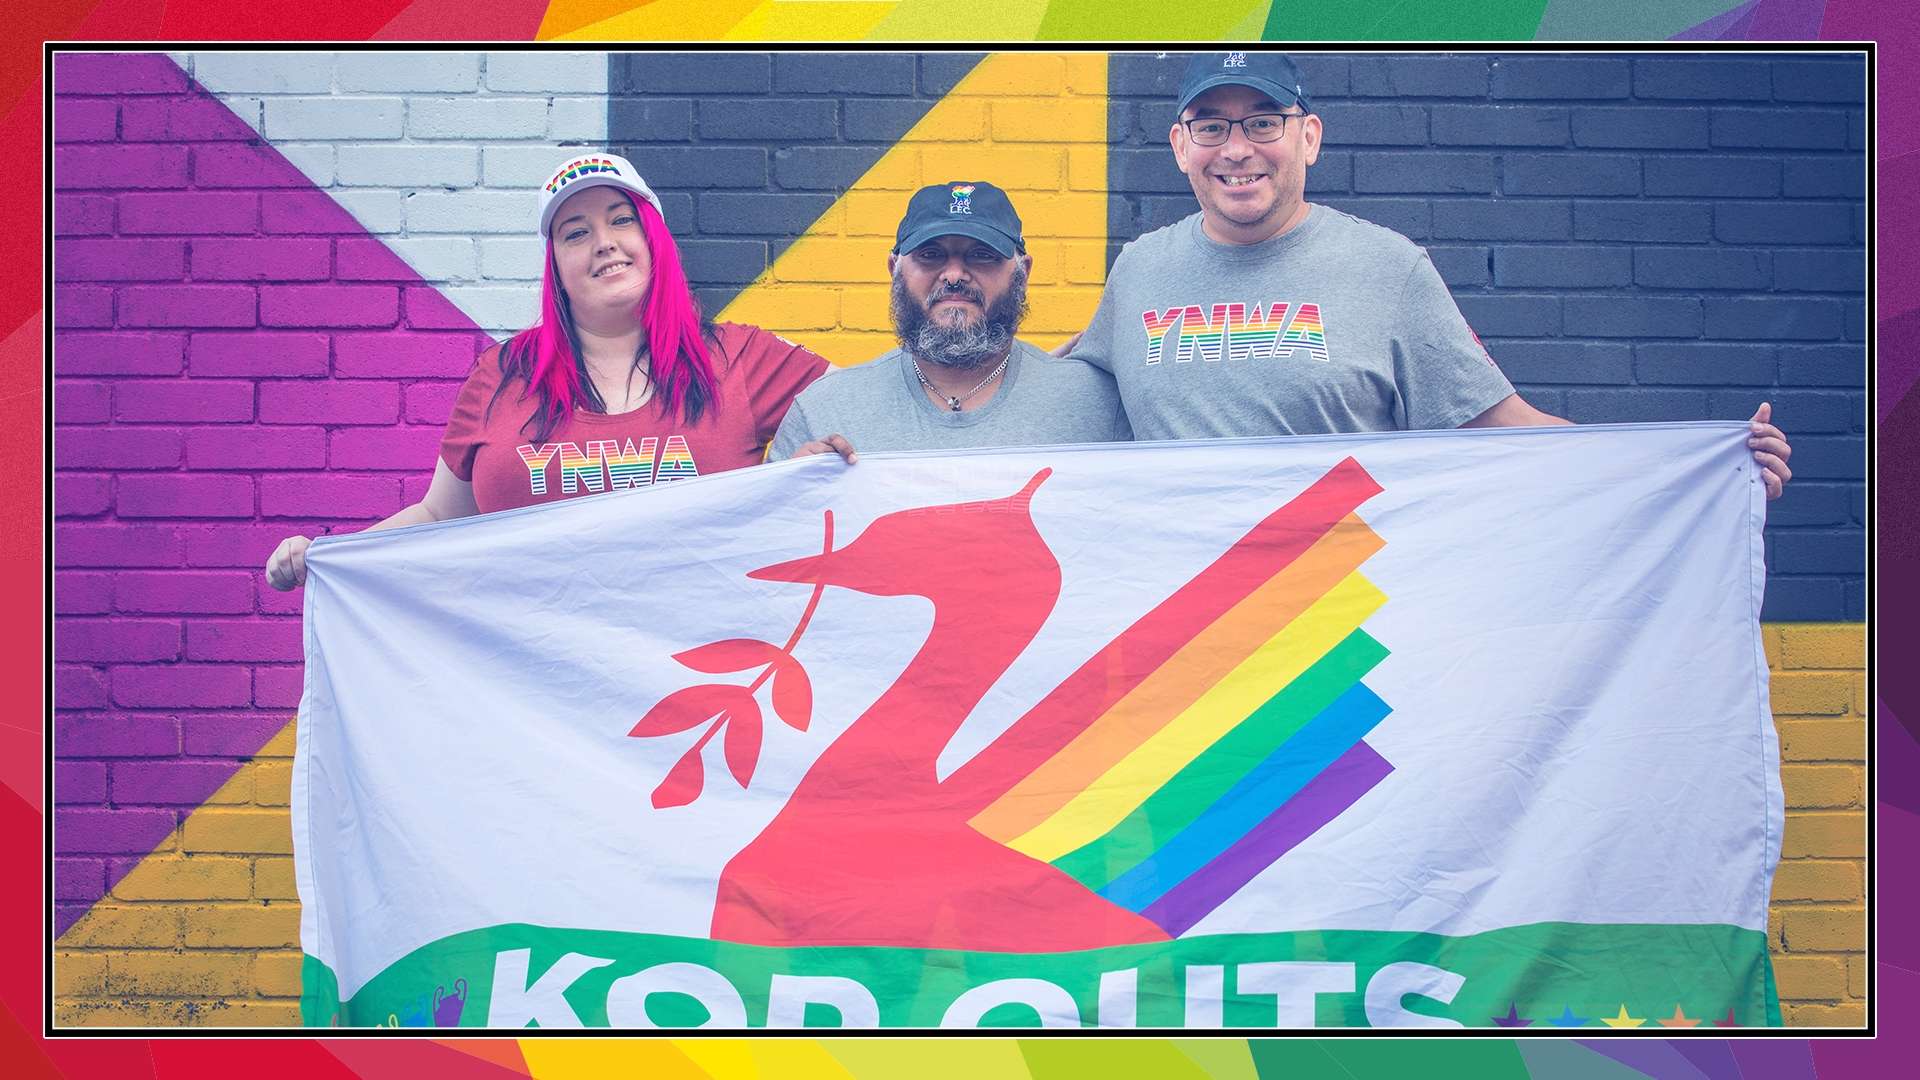 Liverpool LGBT Kop Outs